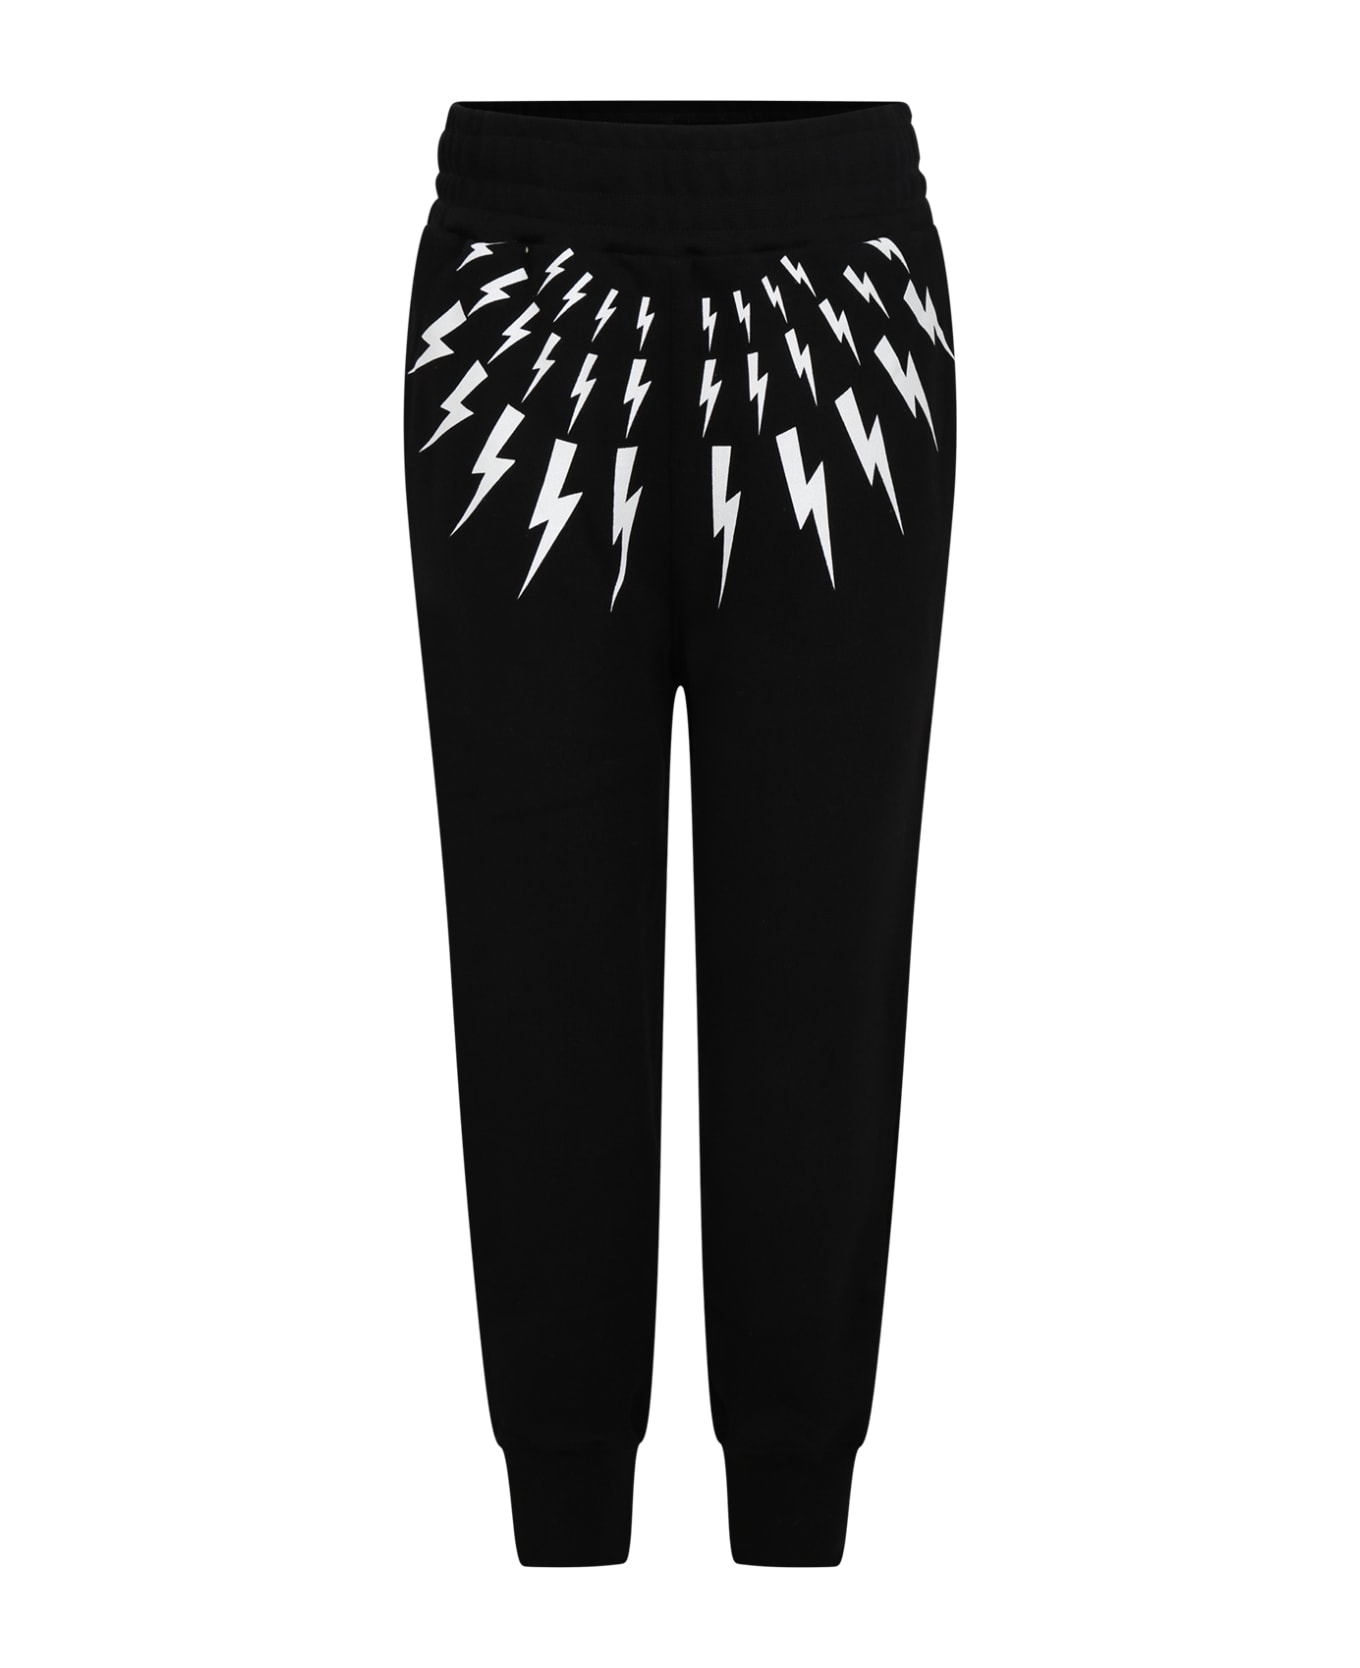 Neil Barrett Black Trousers For Boy With Iconic Lightning Bolts And Logo - Black ボトムス